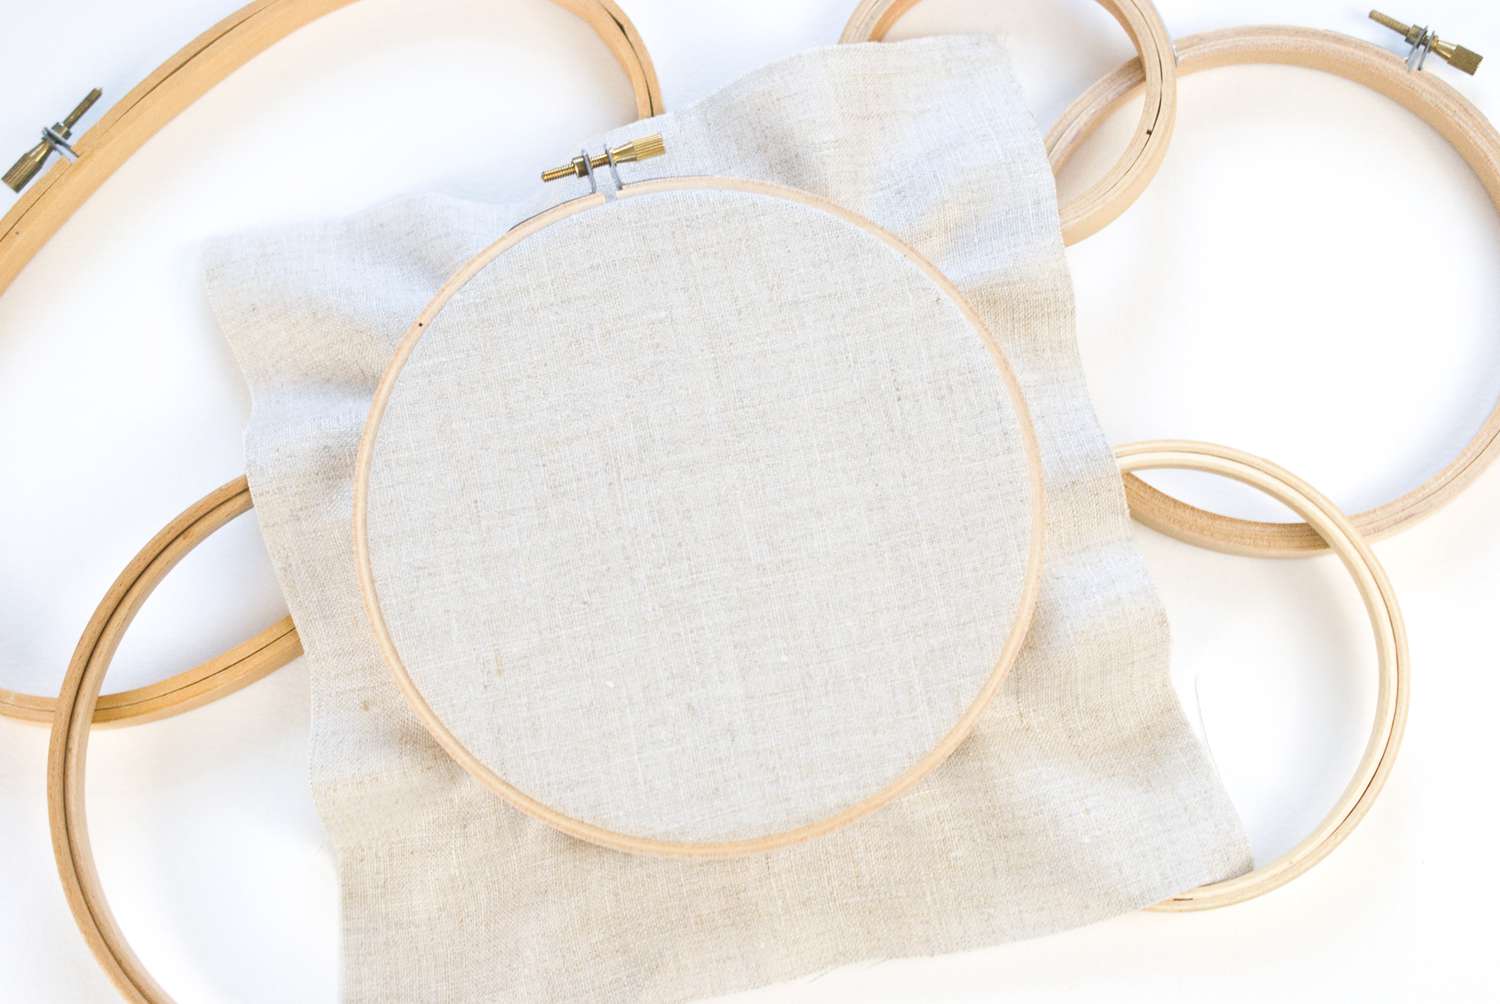 Learn How to Place Fabric in a Hoop